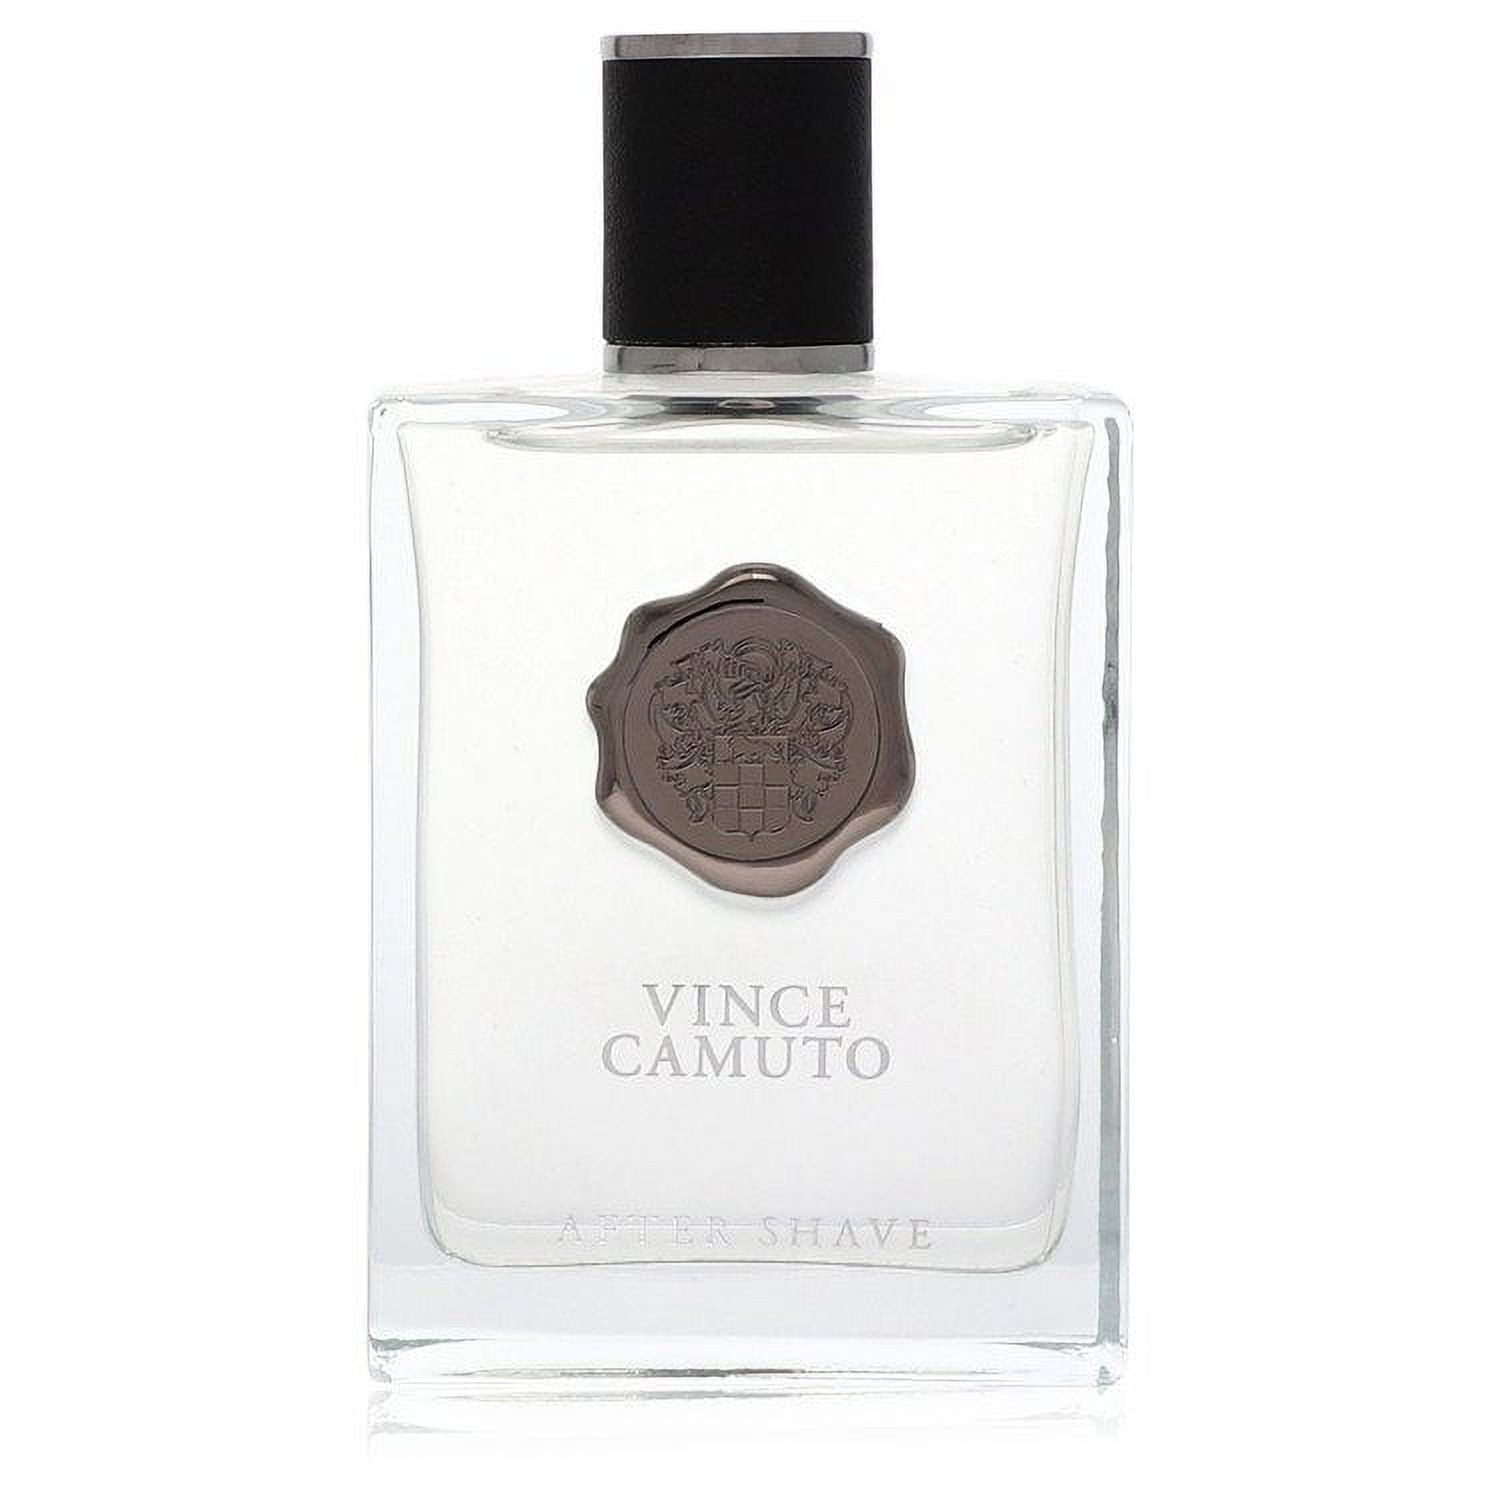 Vince Camuto - Look goodsmell better: Vince Camuto Virtu. (📸  @blvck.fashion.tips) #scentsofstyle #fragrance